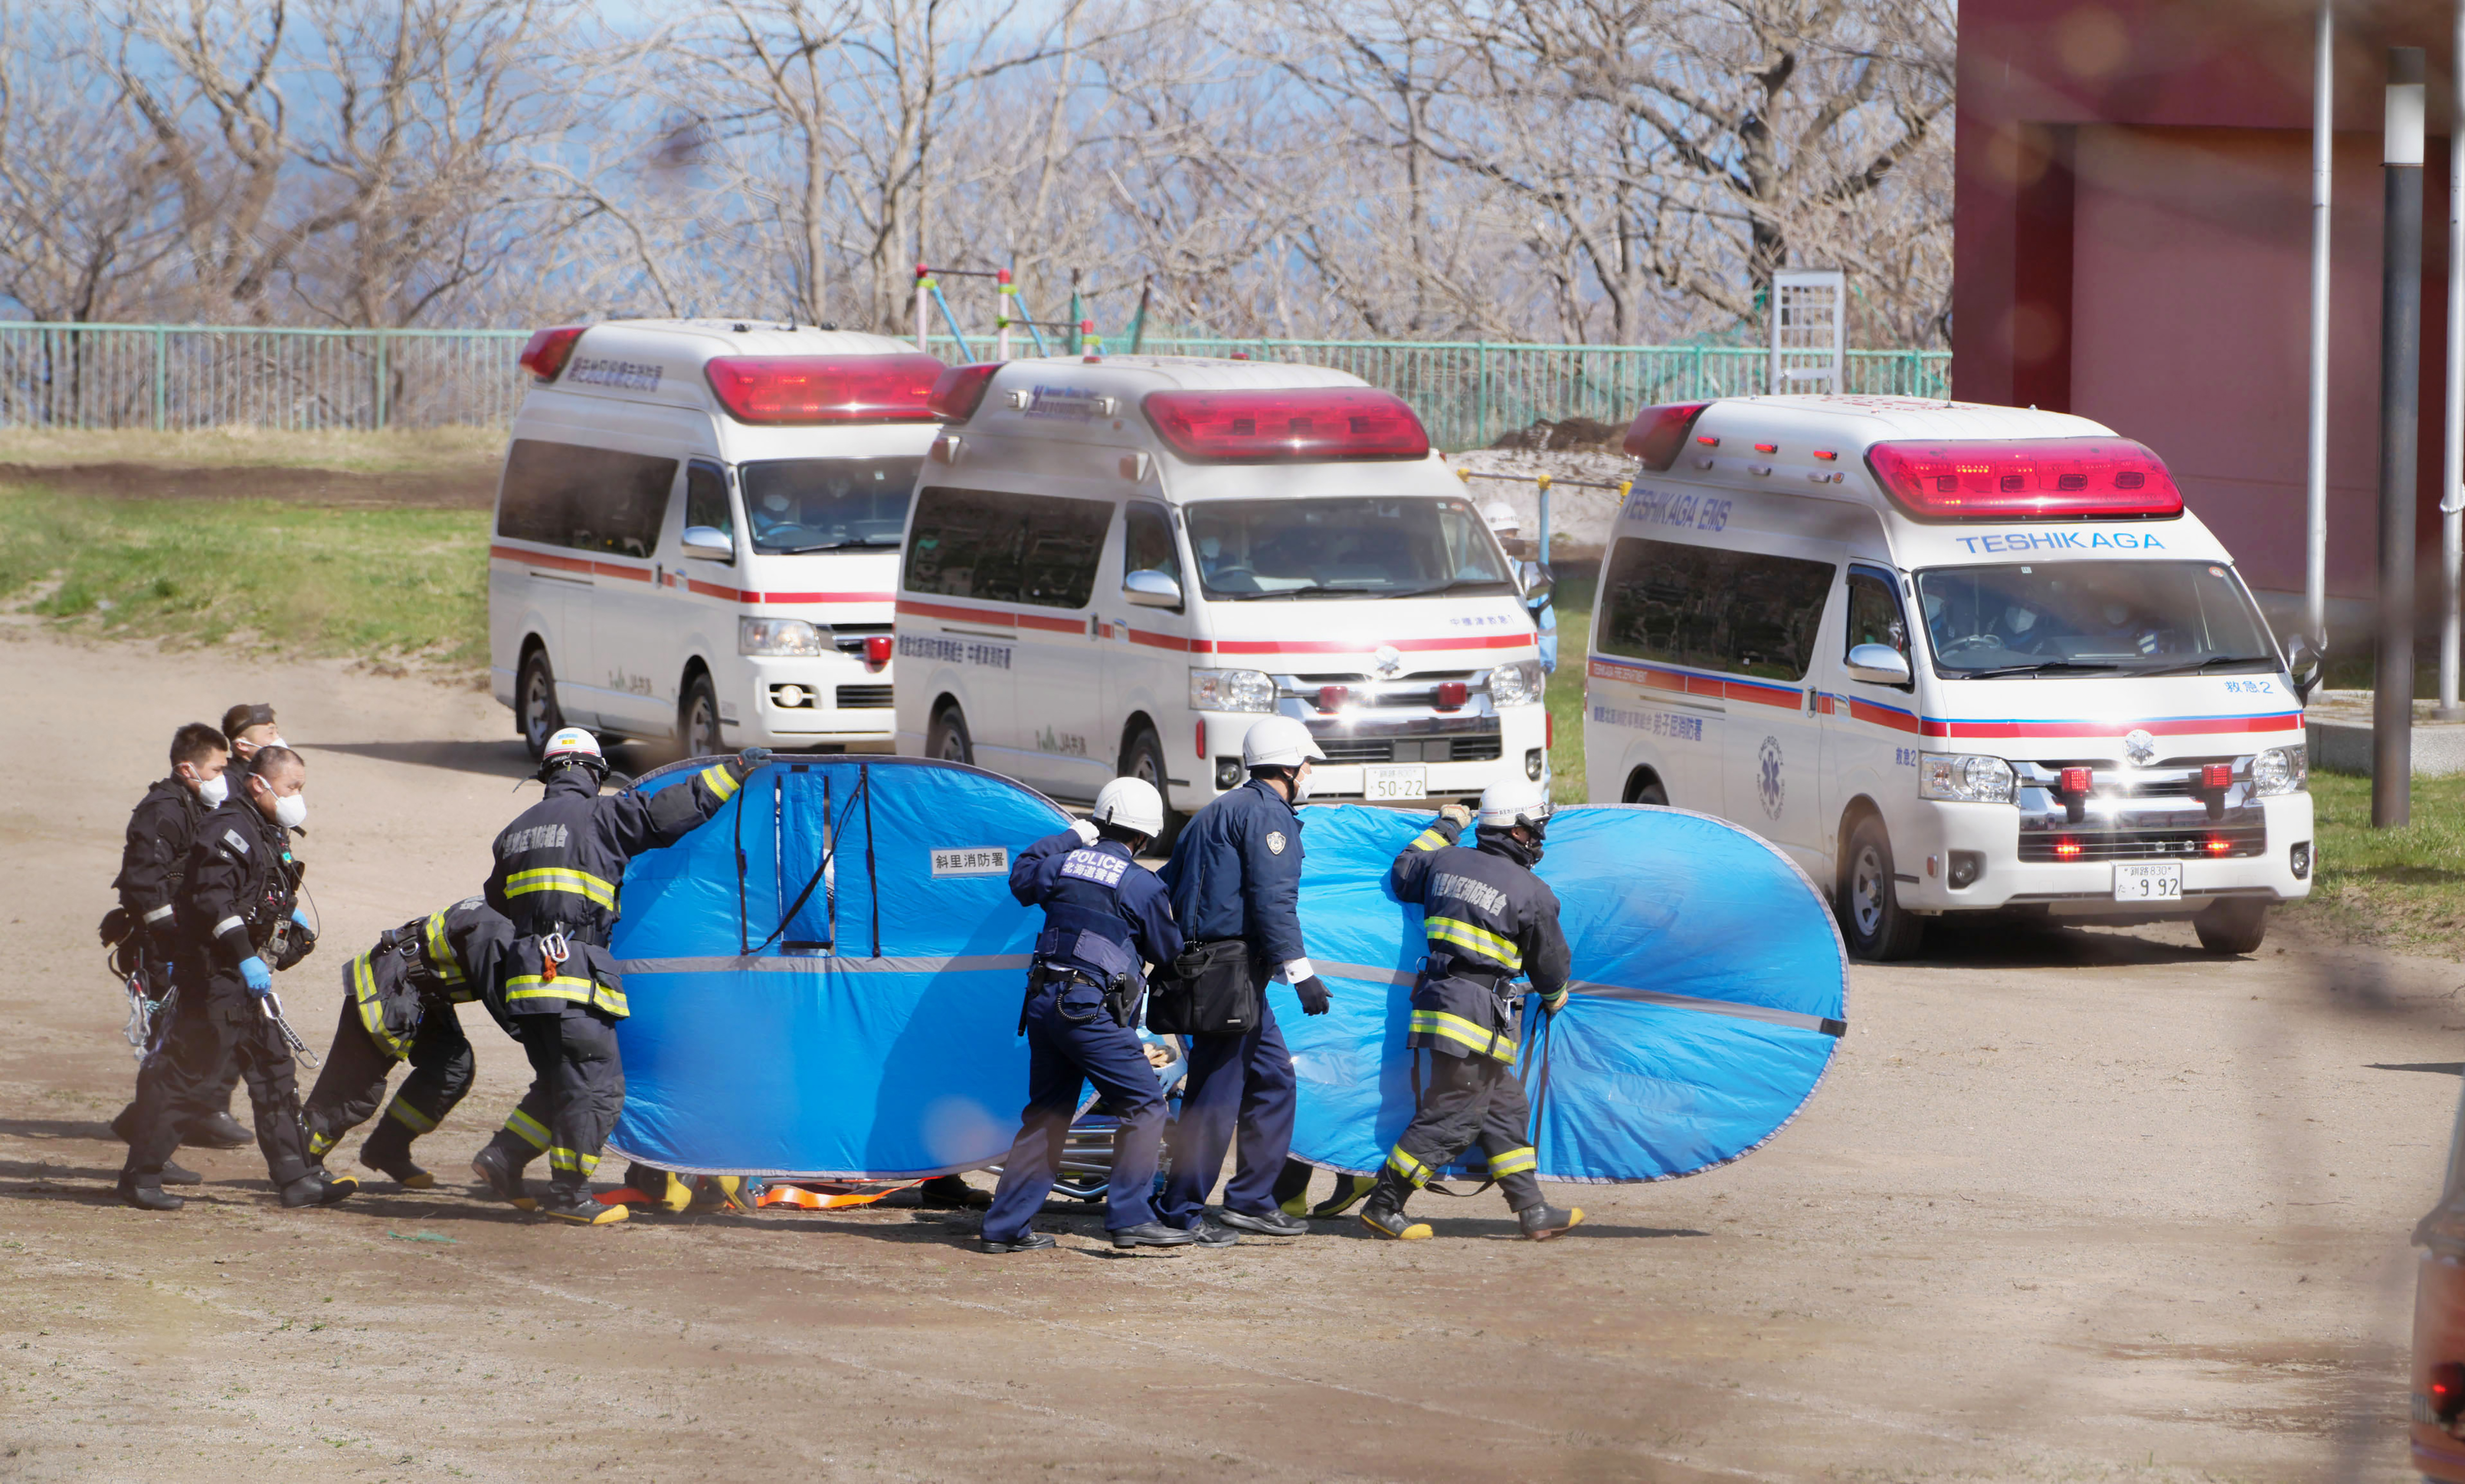 Firefighters transfer a rescued person in Shari, in the northern island of Hokkaido Sunday, April 24, 2022. The Japanese Coast Guard said Sunday that rescue helicopters found four of the 26 people on a tour boat missing in the frigid waters of northern Japan since the day before, but their conditions are unknown.